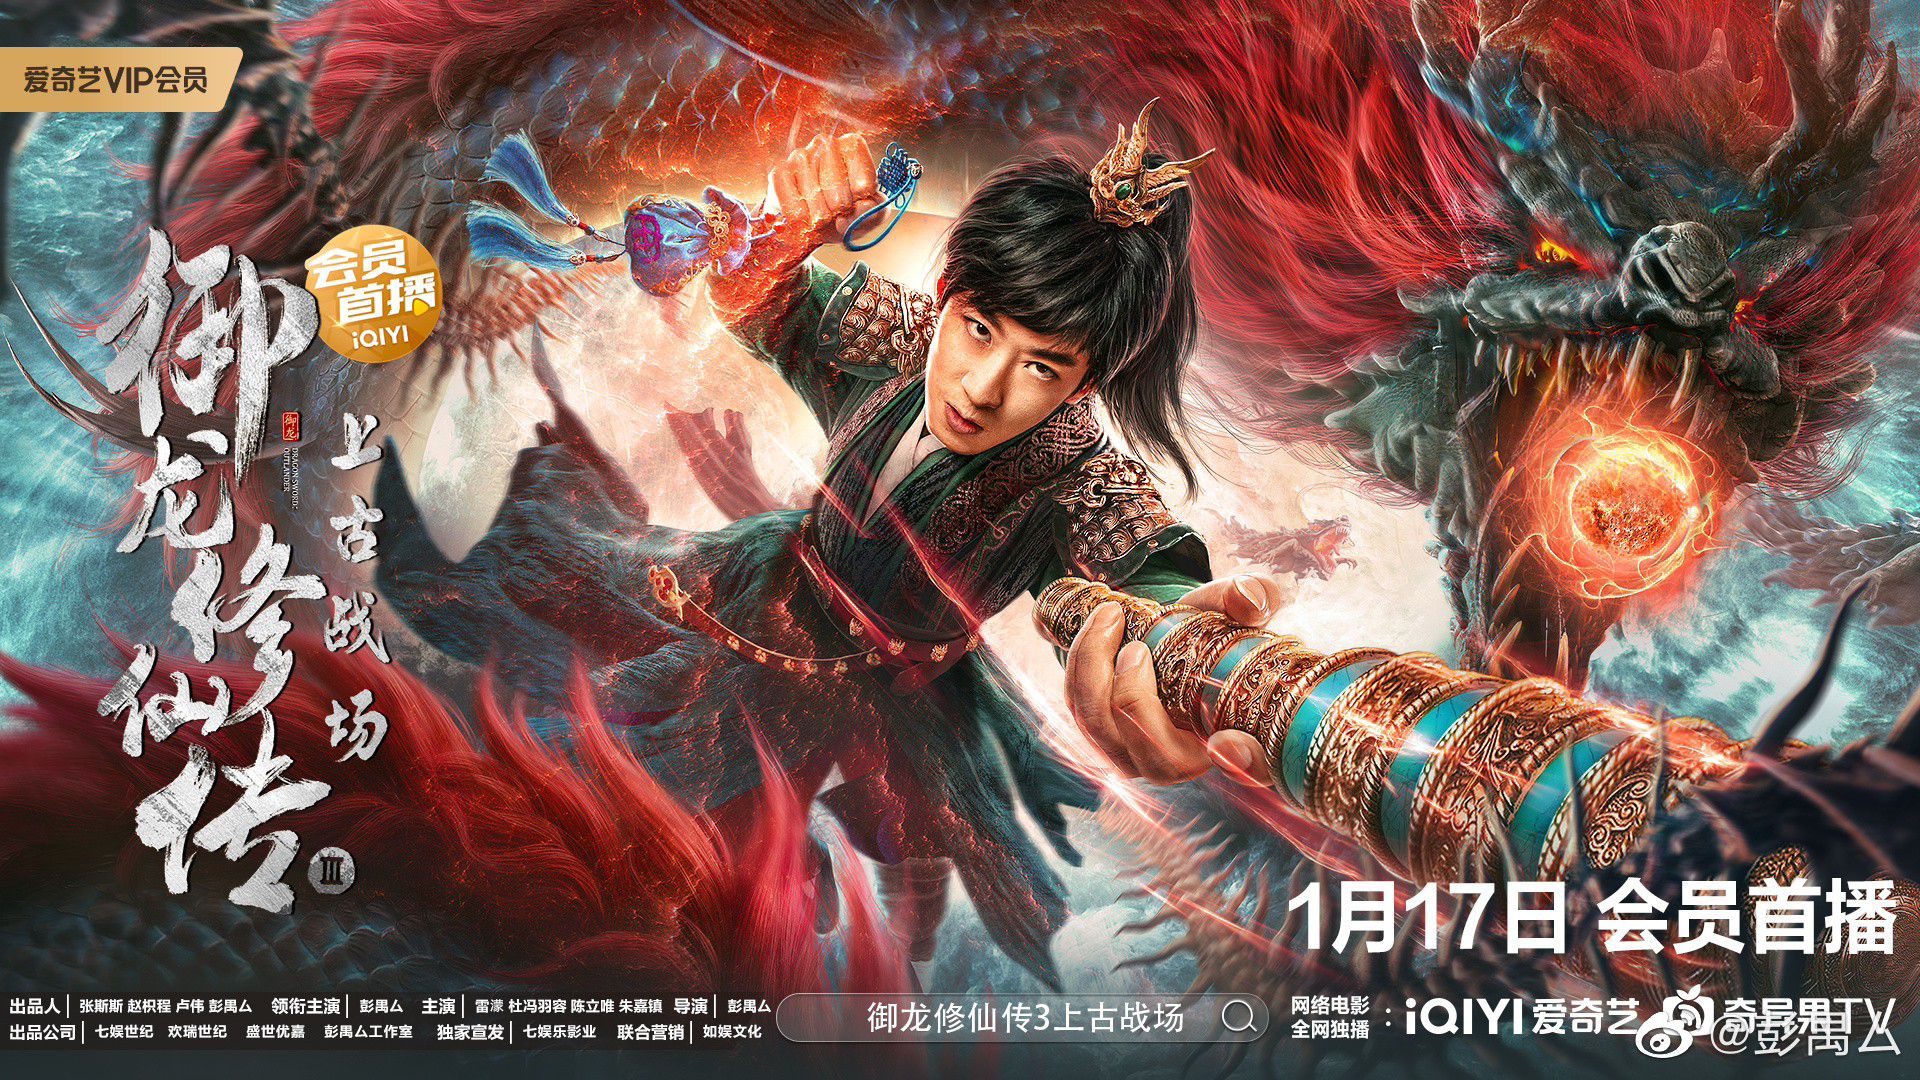 Dragon Sword: Outlander (2021) Full online with English subtitle for free –  iQIYI